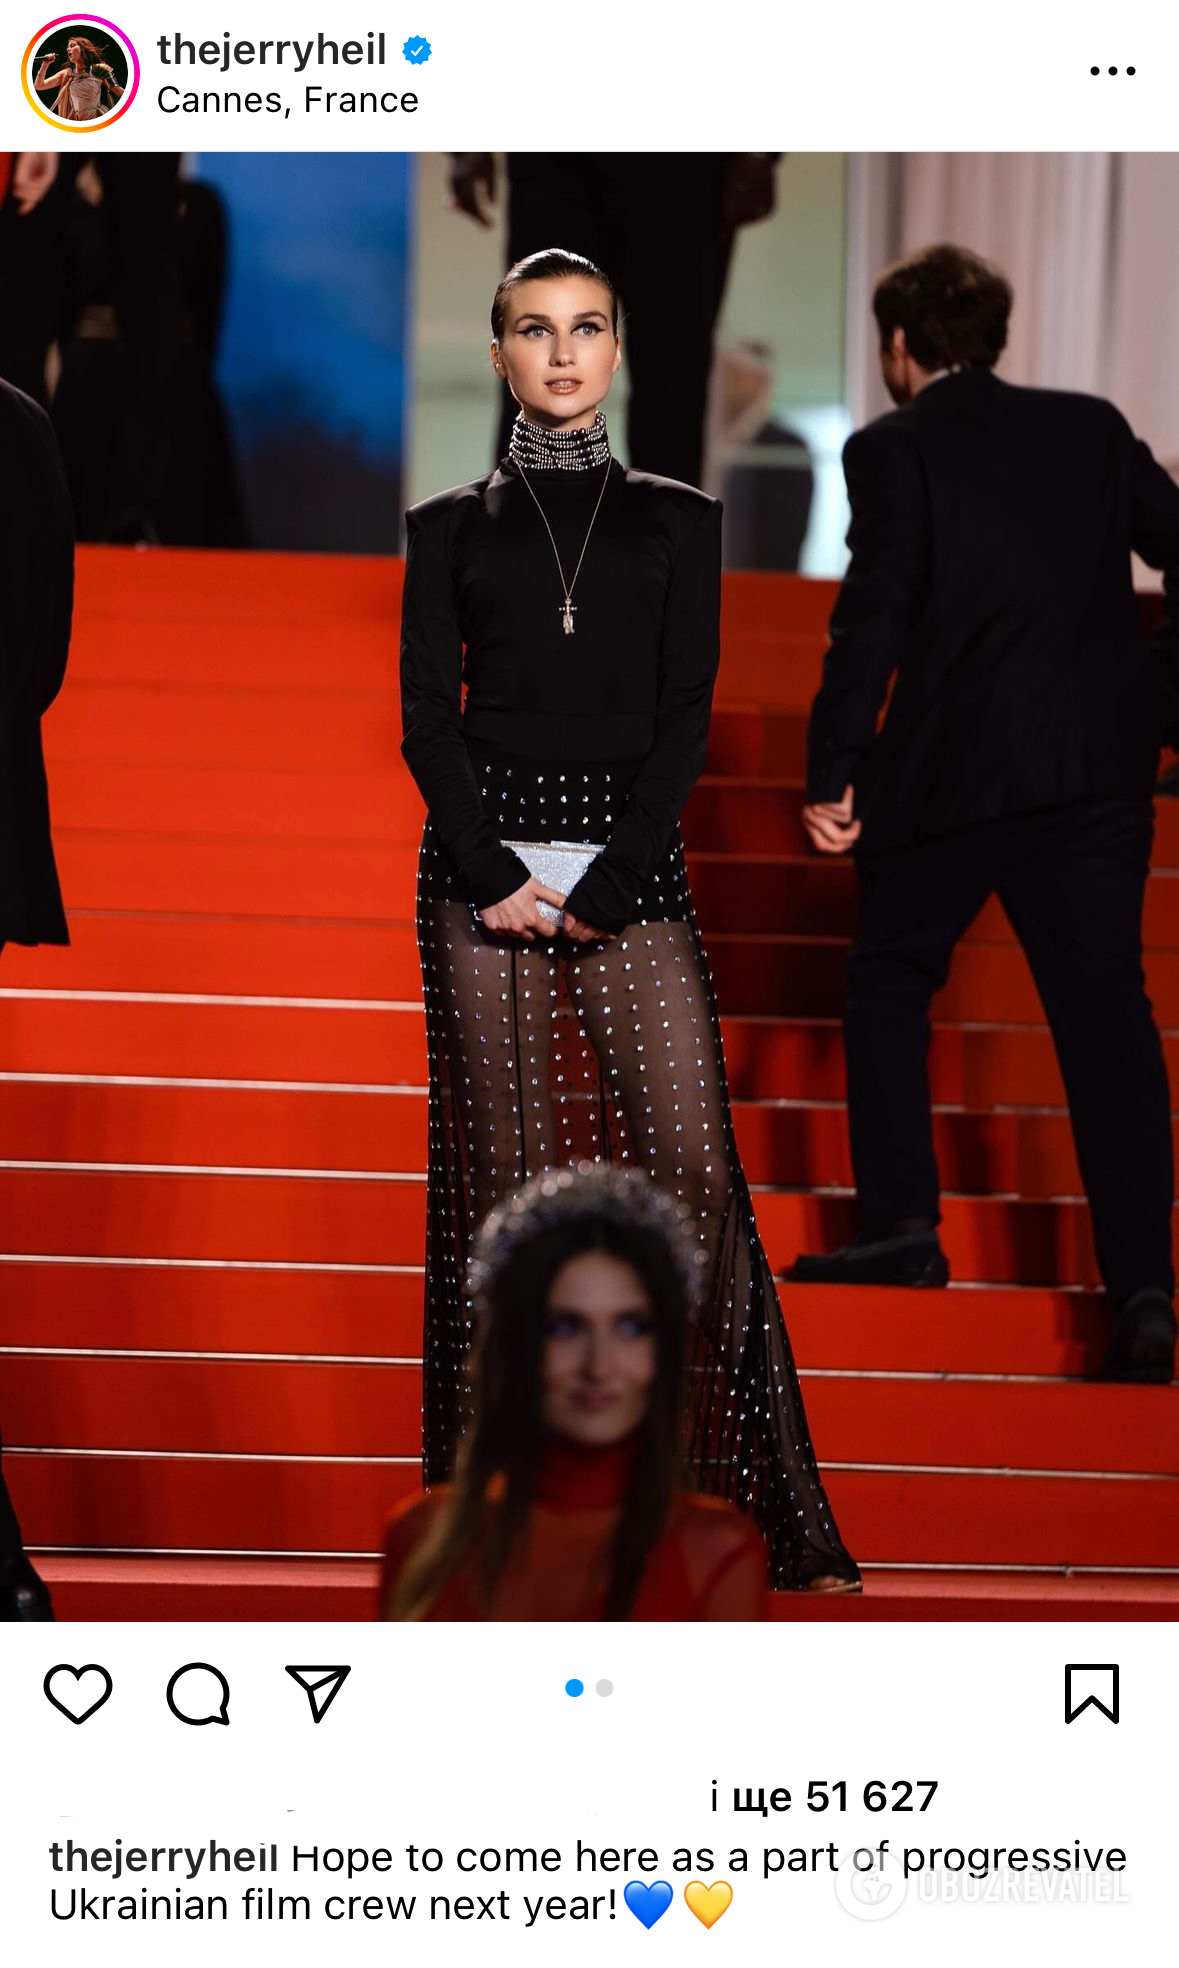 Jerry Heil shows off another look on the Cannes red carpet: the singer appeared in a see-through skirt dotted with rhinestones